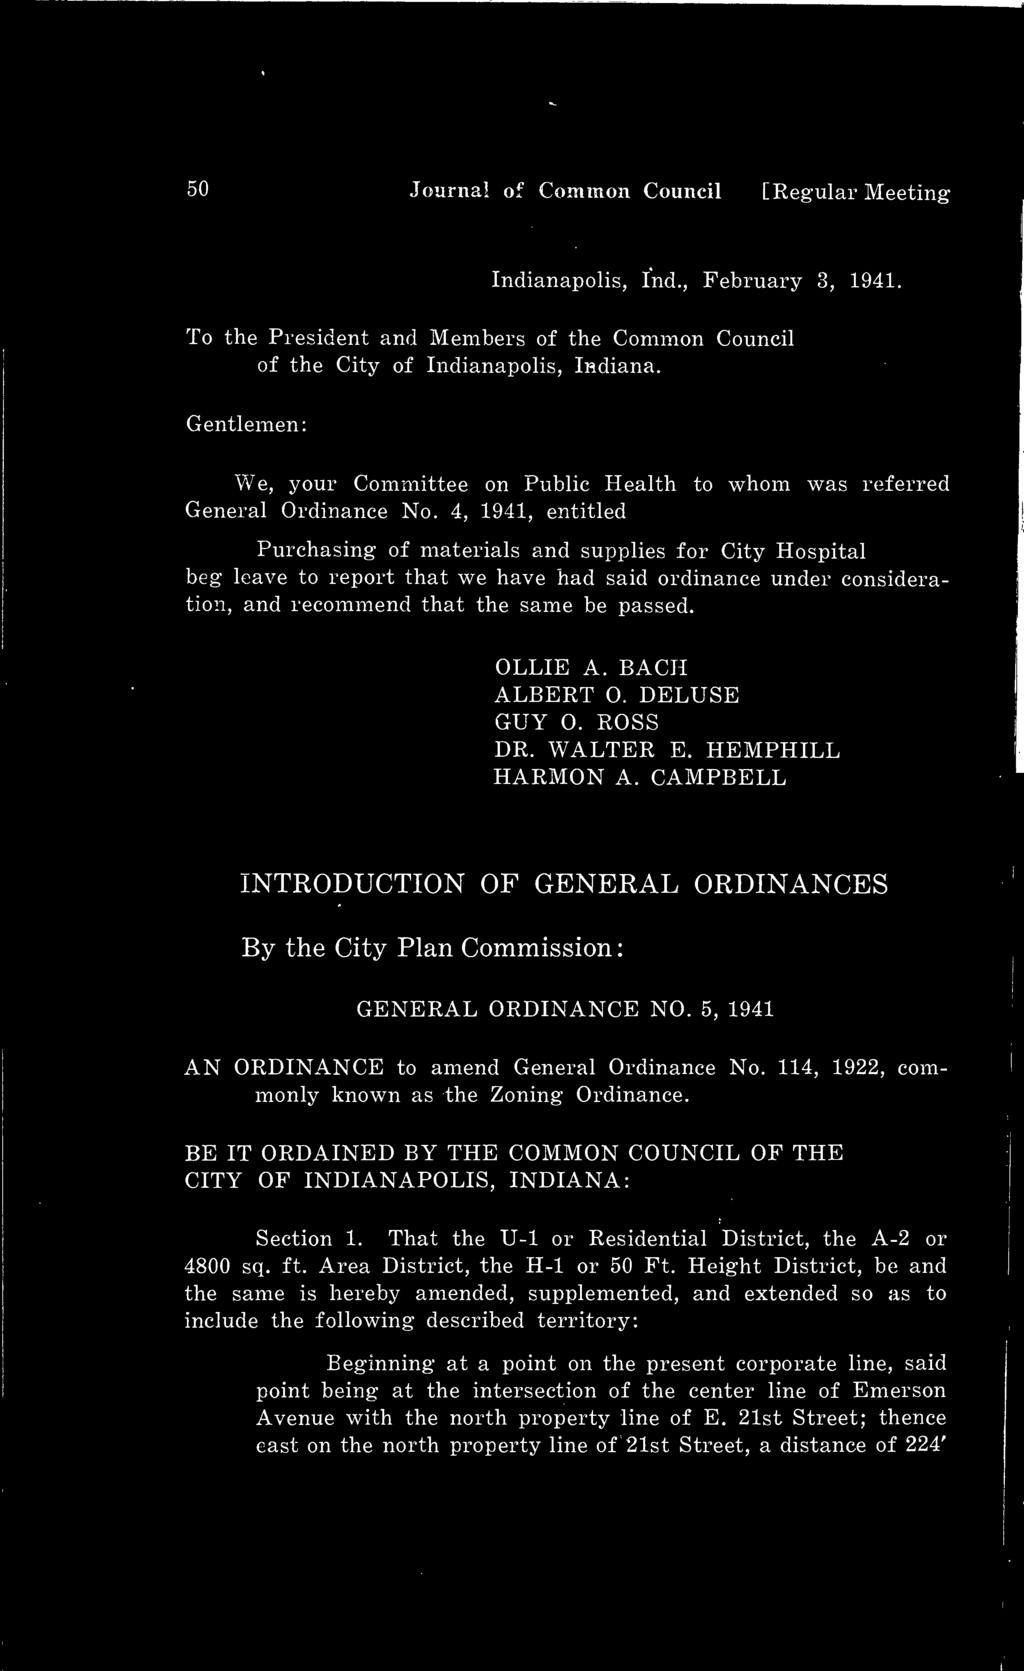 4, 1941, entitled Purchasing of materials and supplies for City Hospital beg leave to report that we have had said ordinance under consideration, and recommend that the same be passed. OLLIE A.